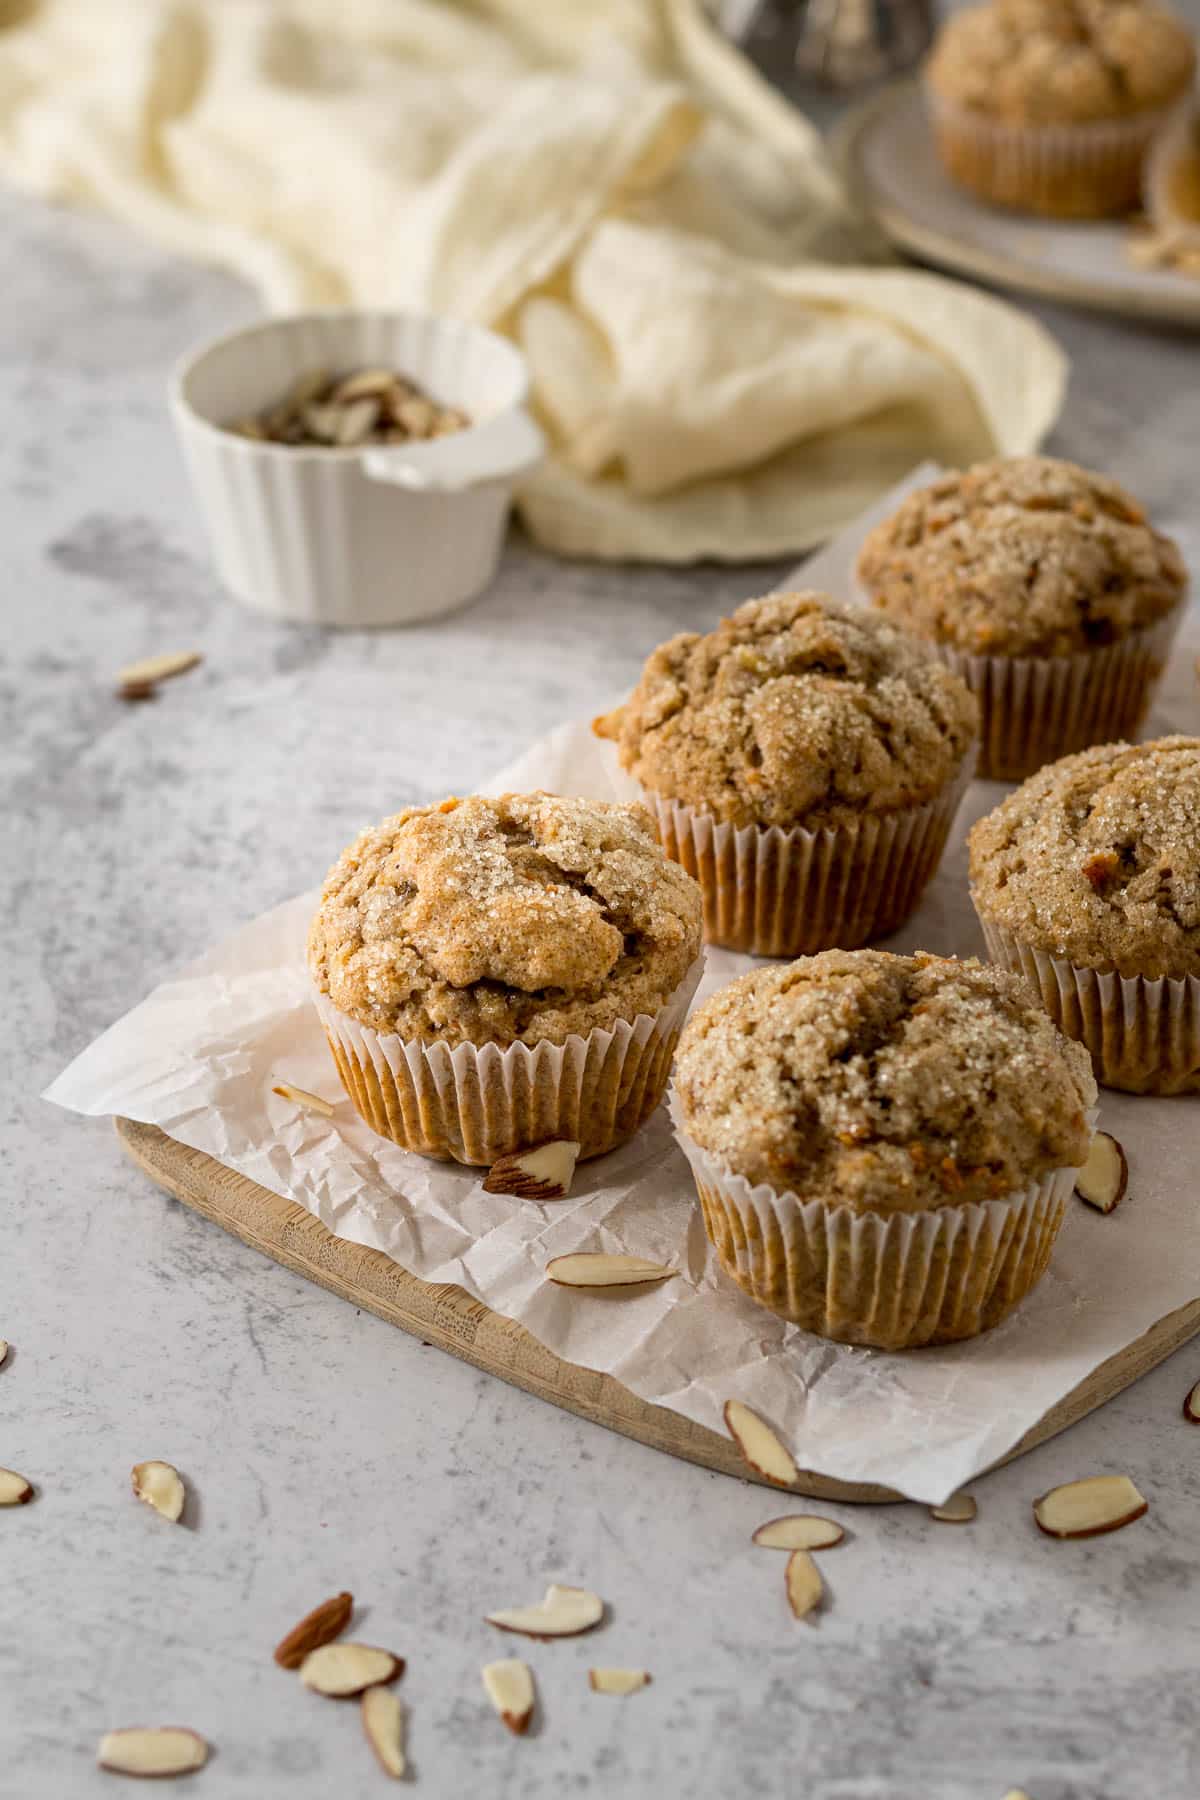 Banana carrot muffins on a serving board.